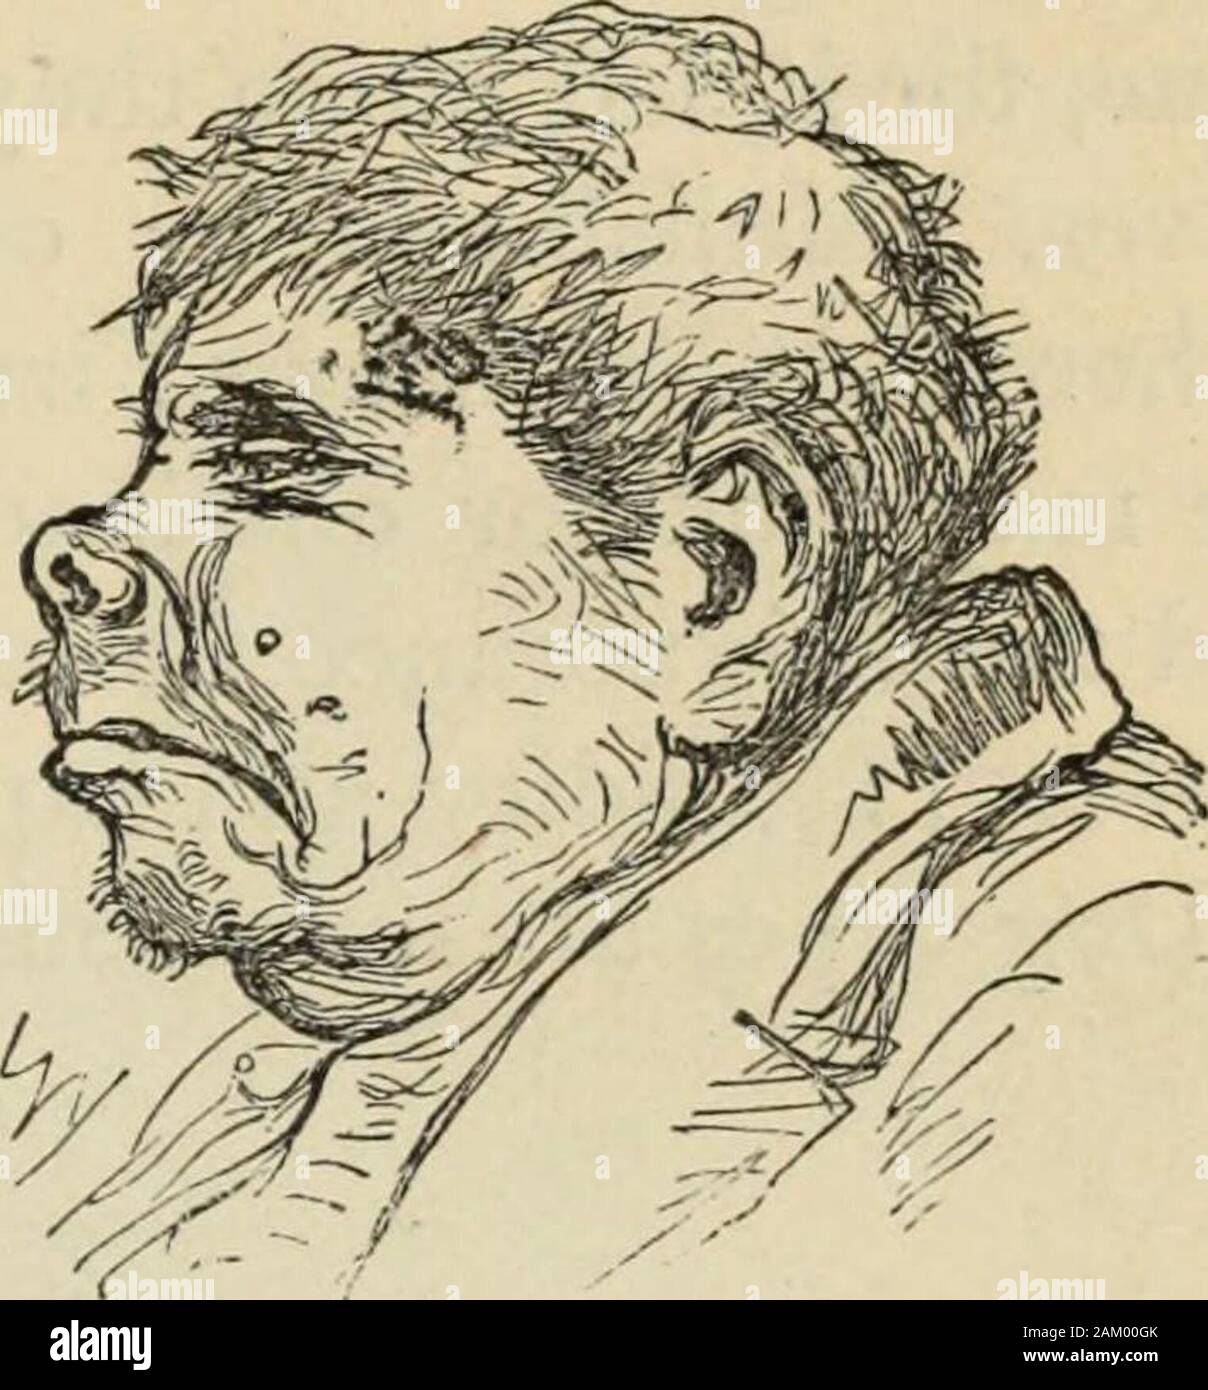 New Physiognomy : or signs of character, as manifested through temperament and external forms, and especially in the 'the human face divine.' . Fig. 903—Hog. Fig. 904.—Hoggish. ger, but even his own kin, because however well supplied histable, he has .only enough for himself. What a pig the fel-low is ! Sure enough! Selfishness is natural and is inheritedby all, while kindness is more generally the result of culture.Were children not taught to be generous and to divide, therewould be far more selfishness in the world than there is. Stock Photo